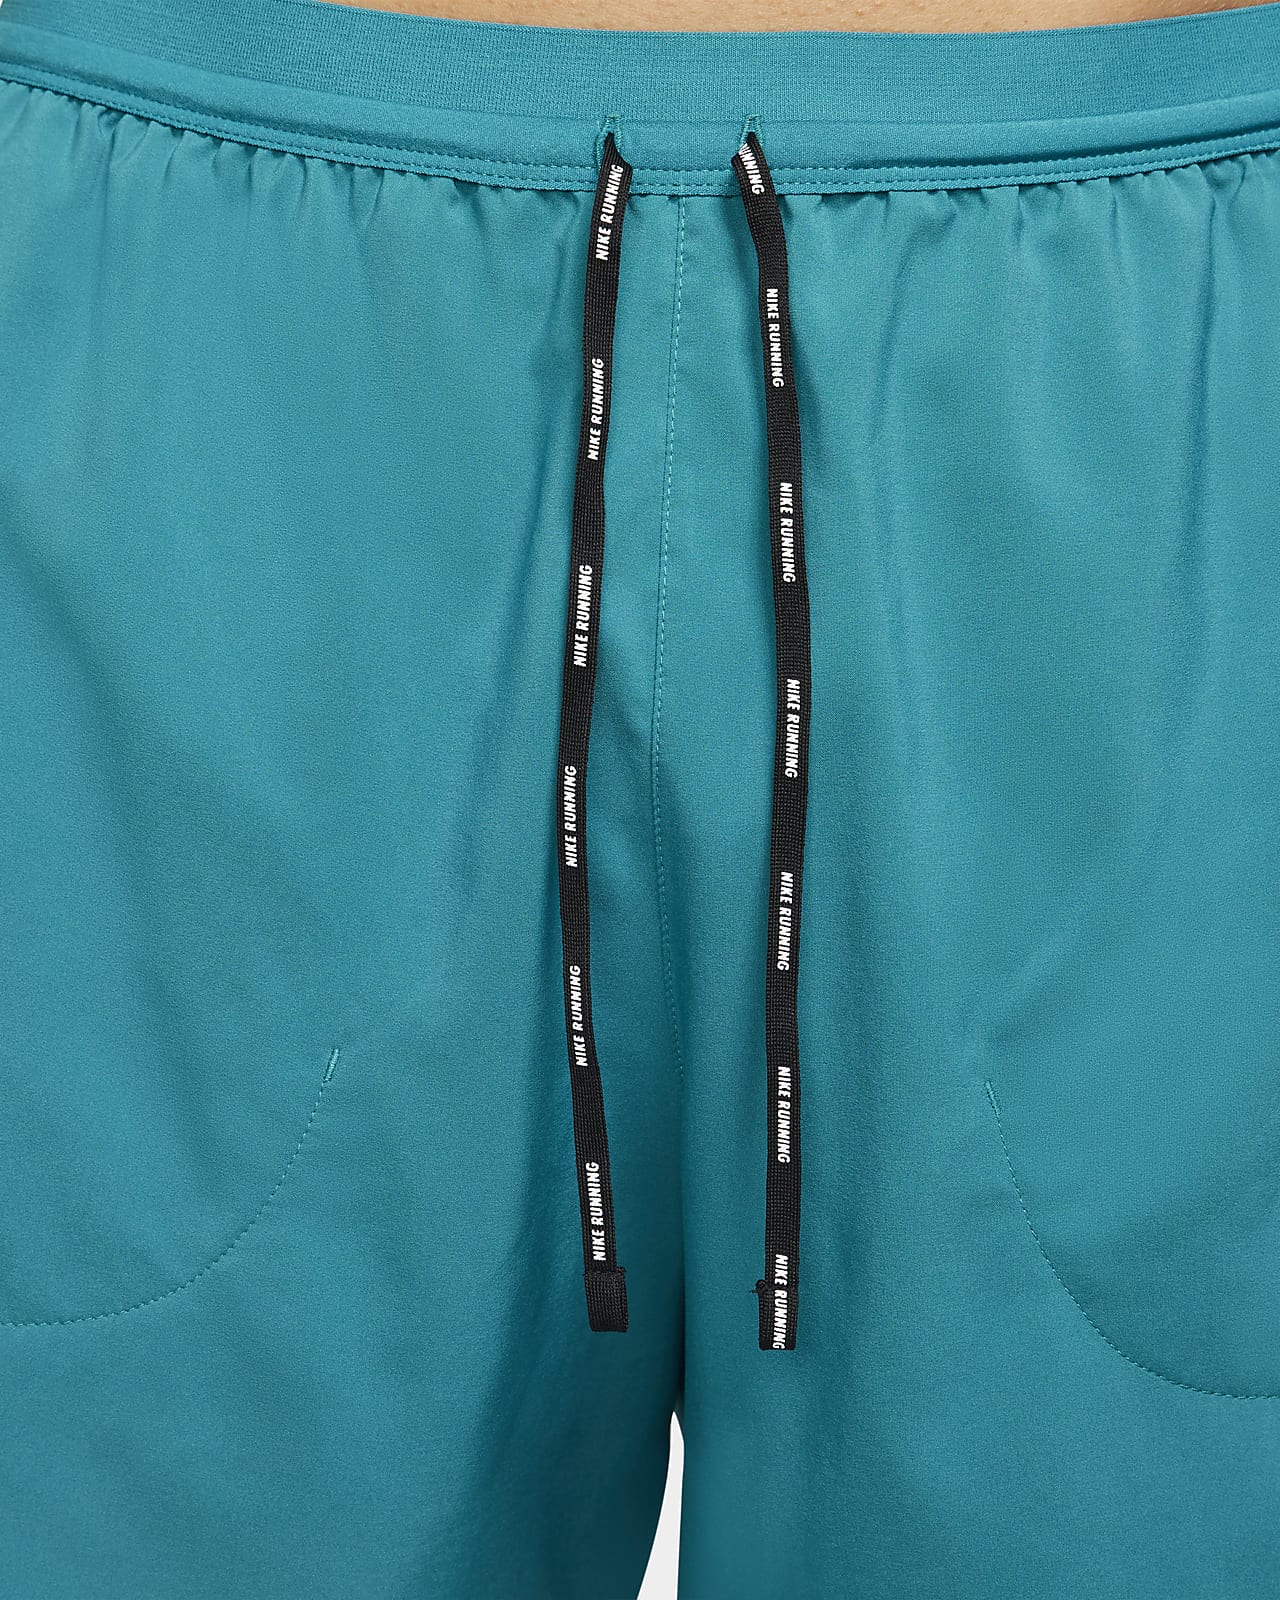 nike shorts without built in underwear